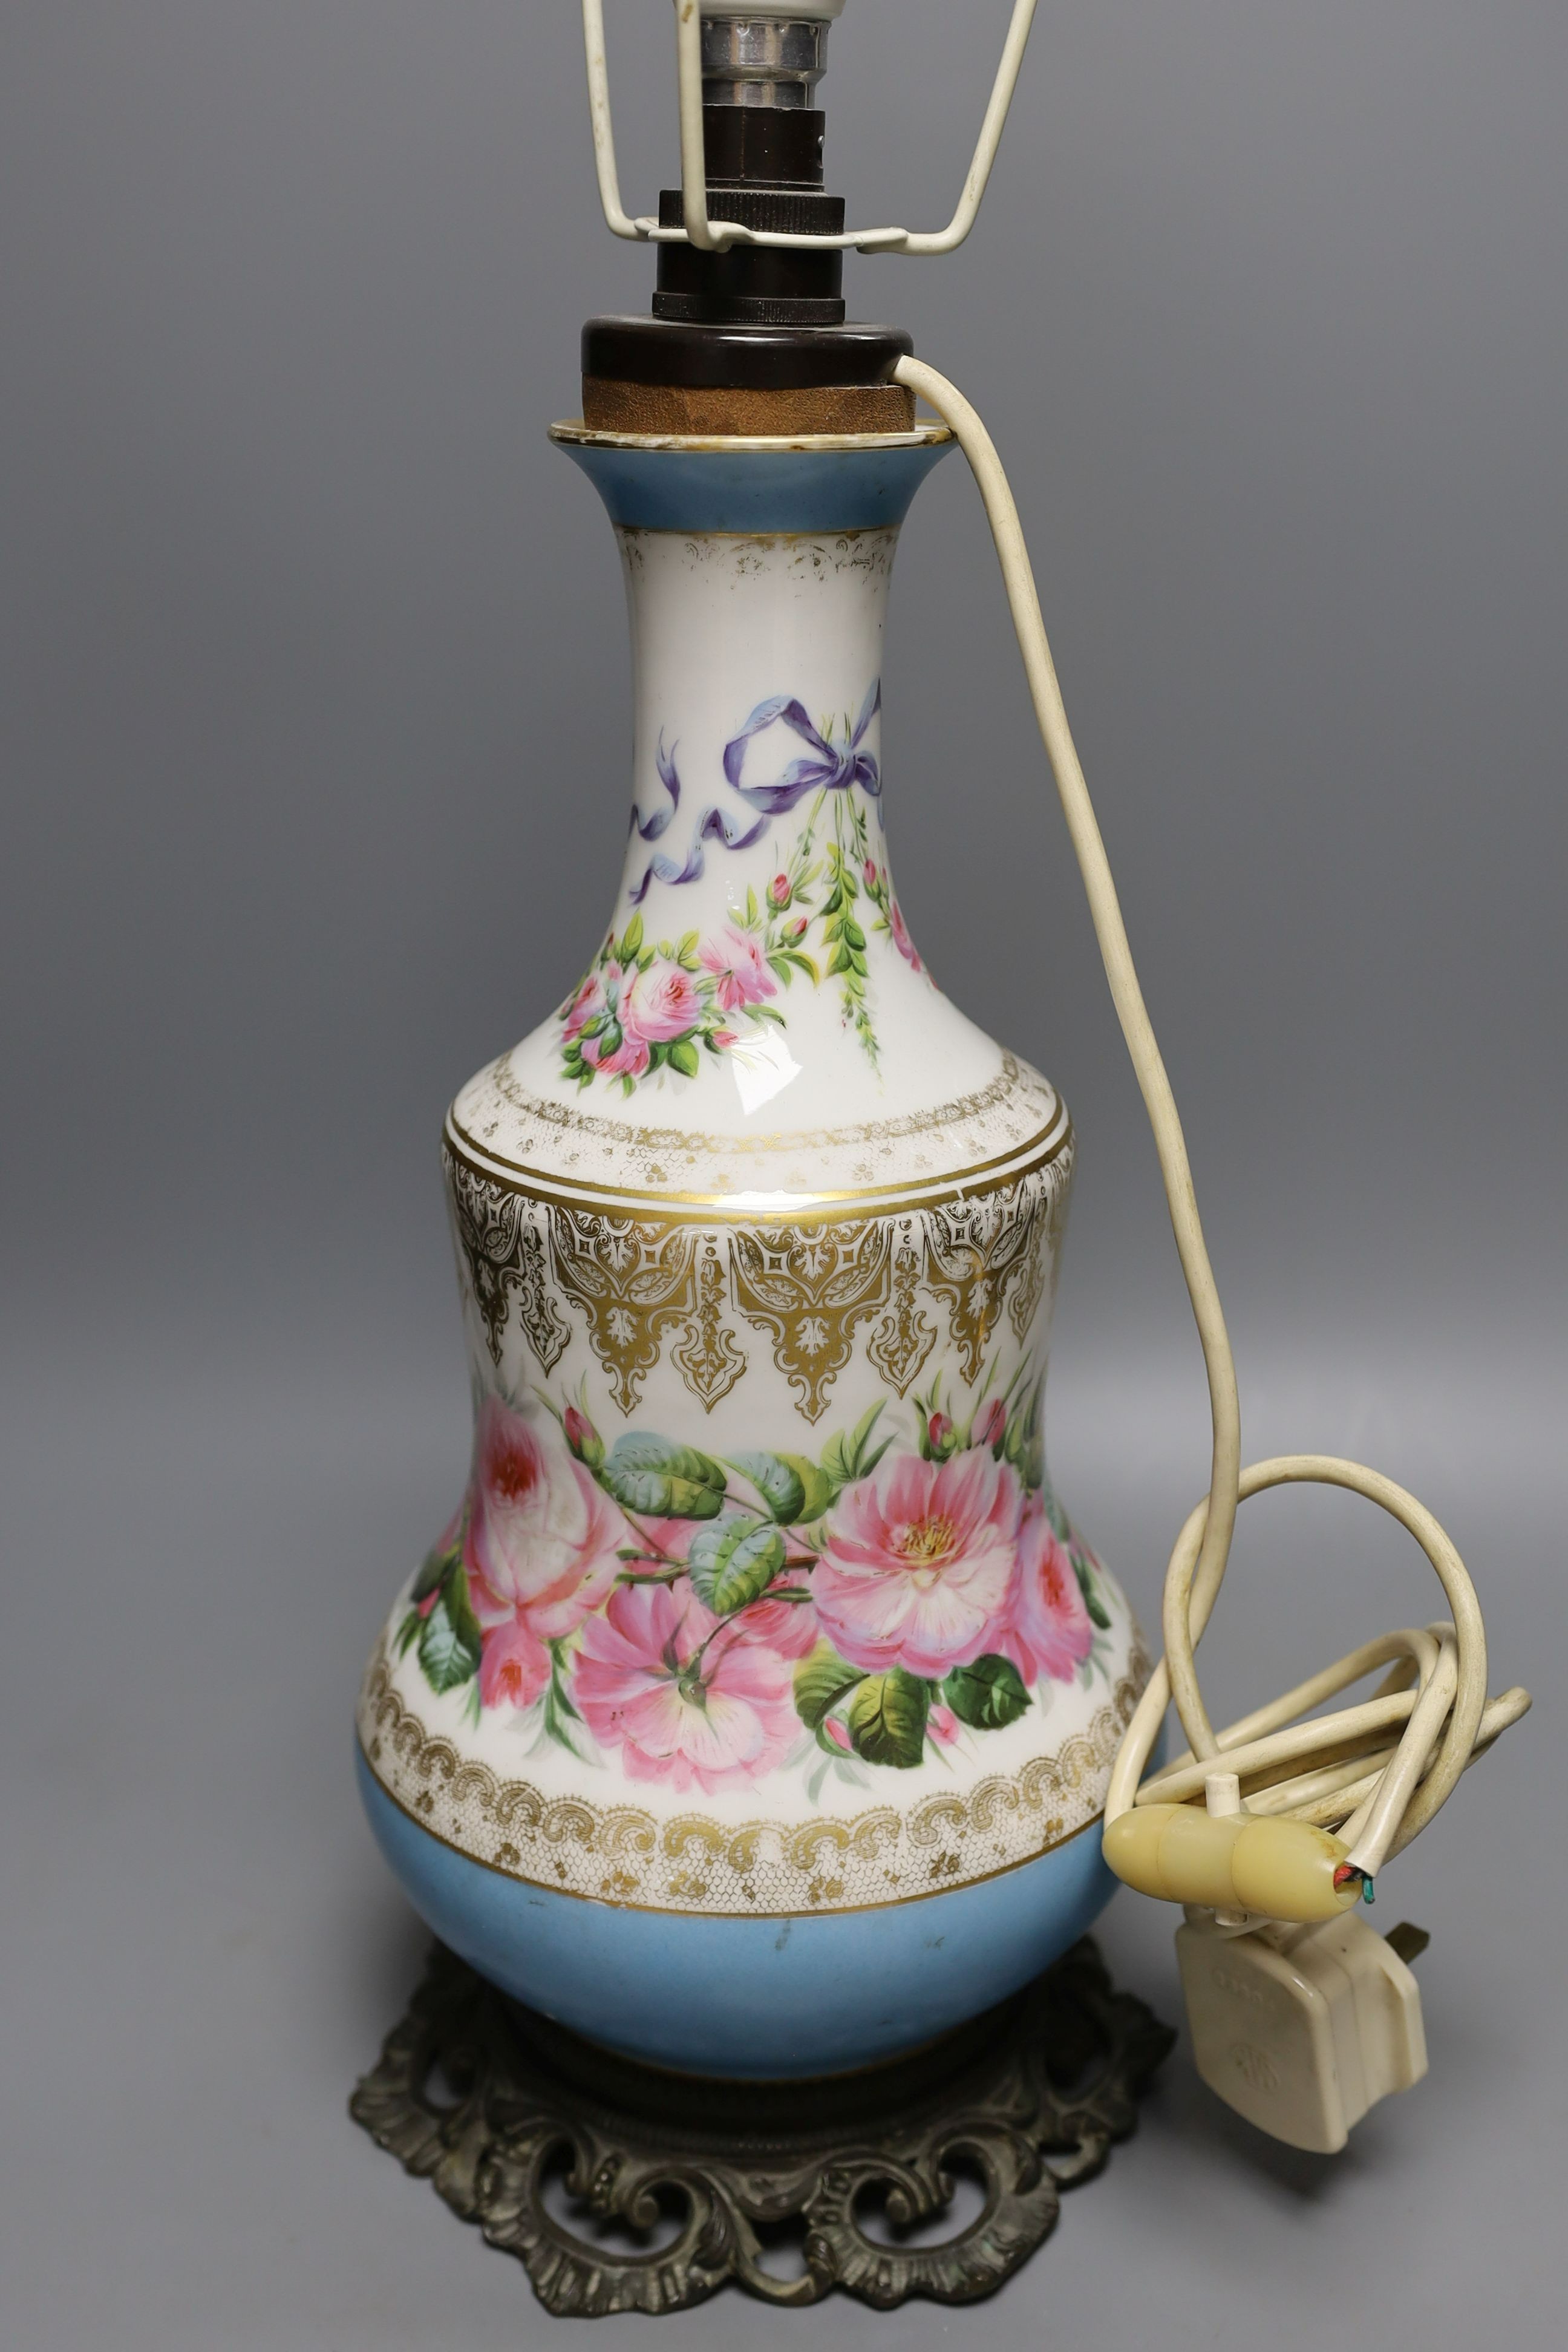 A late 19th century Paris porcelain vase mounted as a lamp - 45.5cm tall